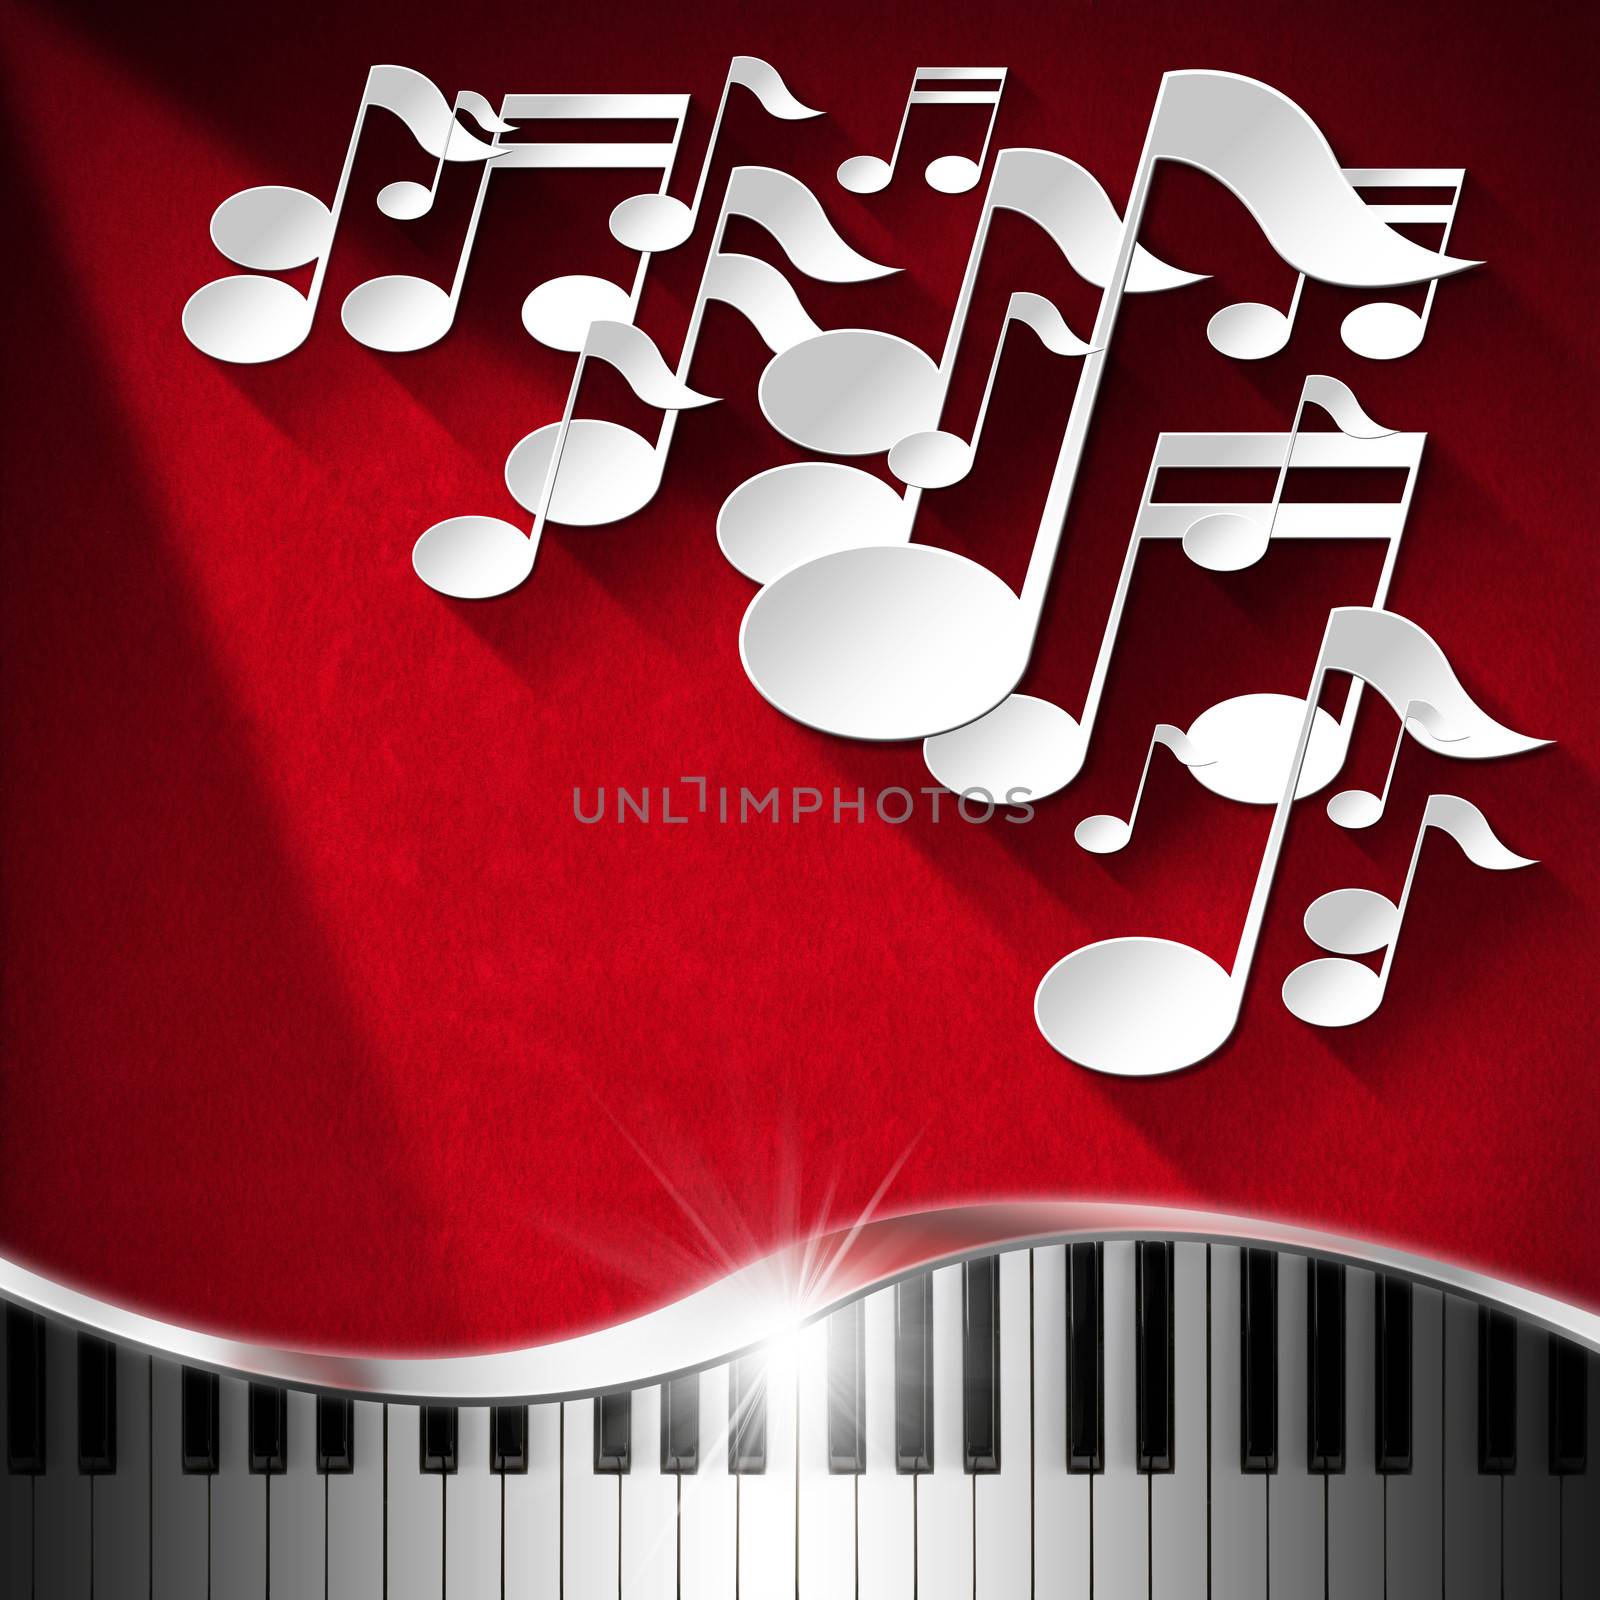 White musical notes and piano keyboard on red velvet background with shadows